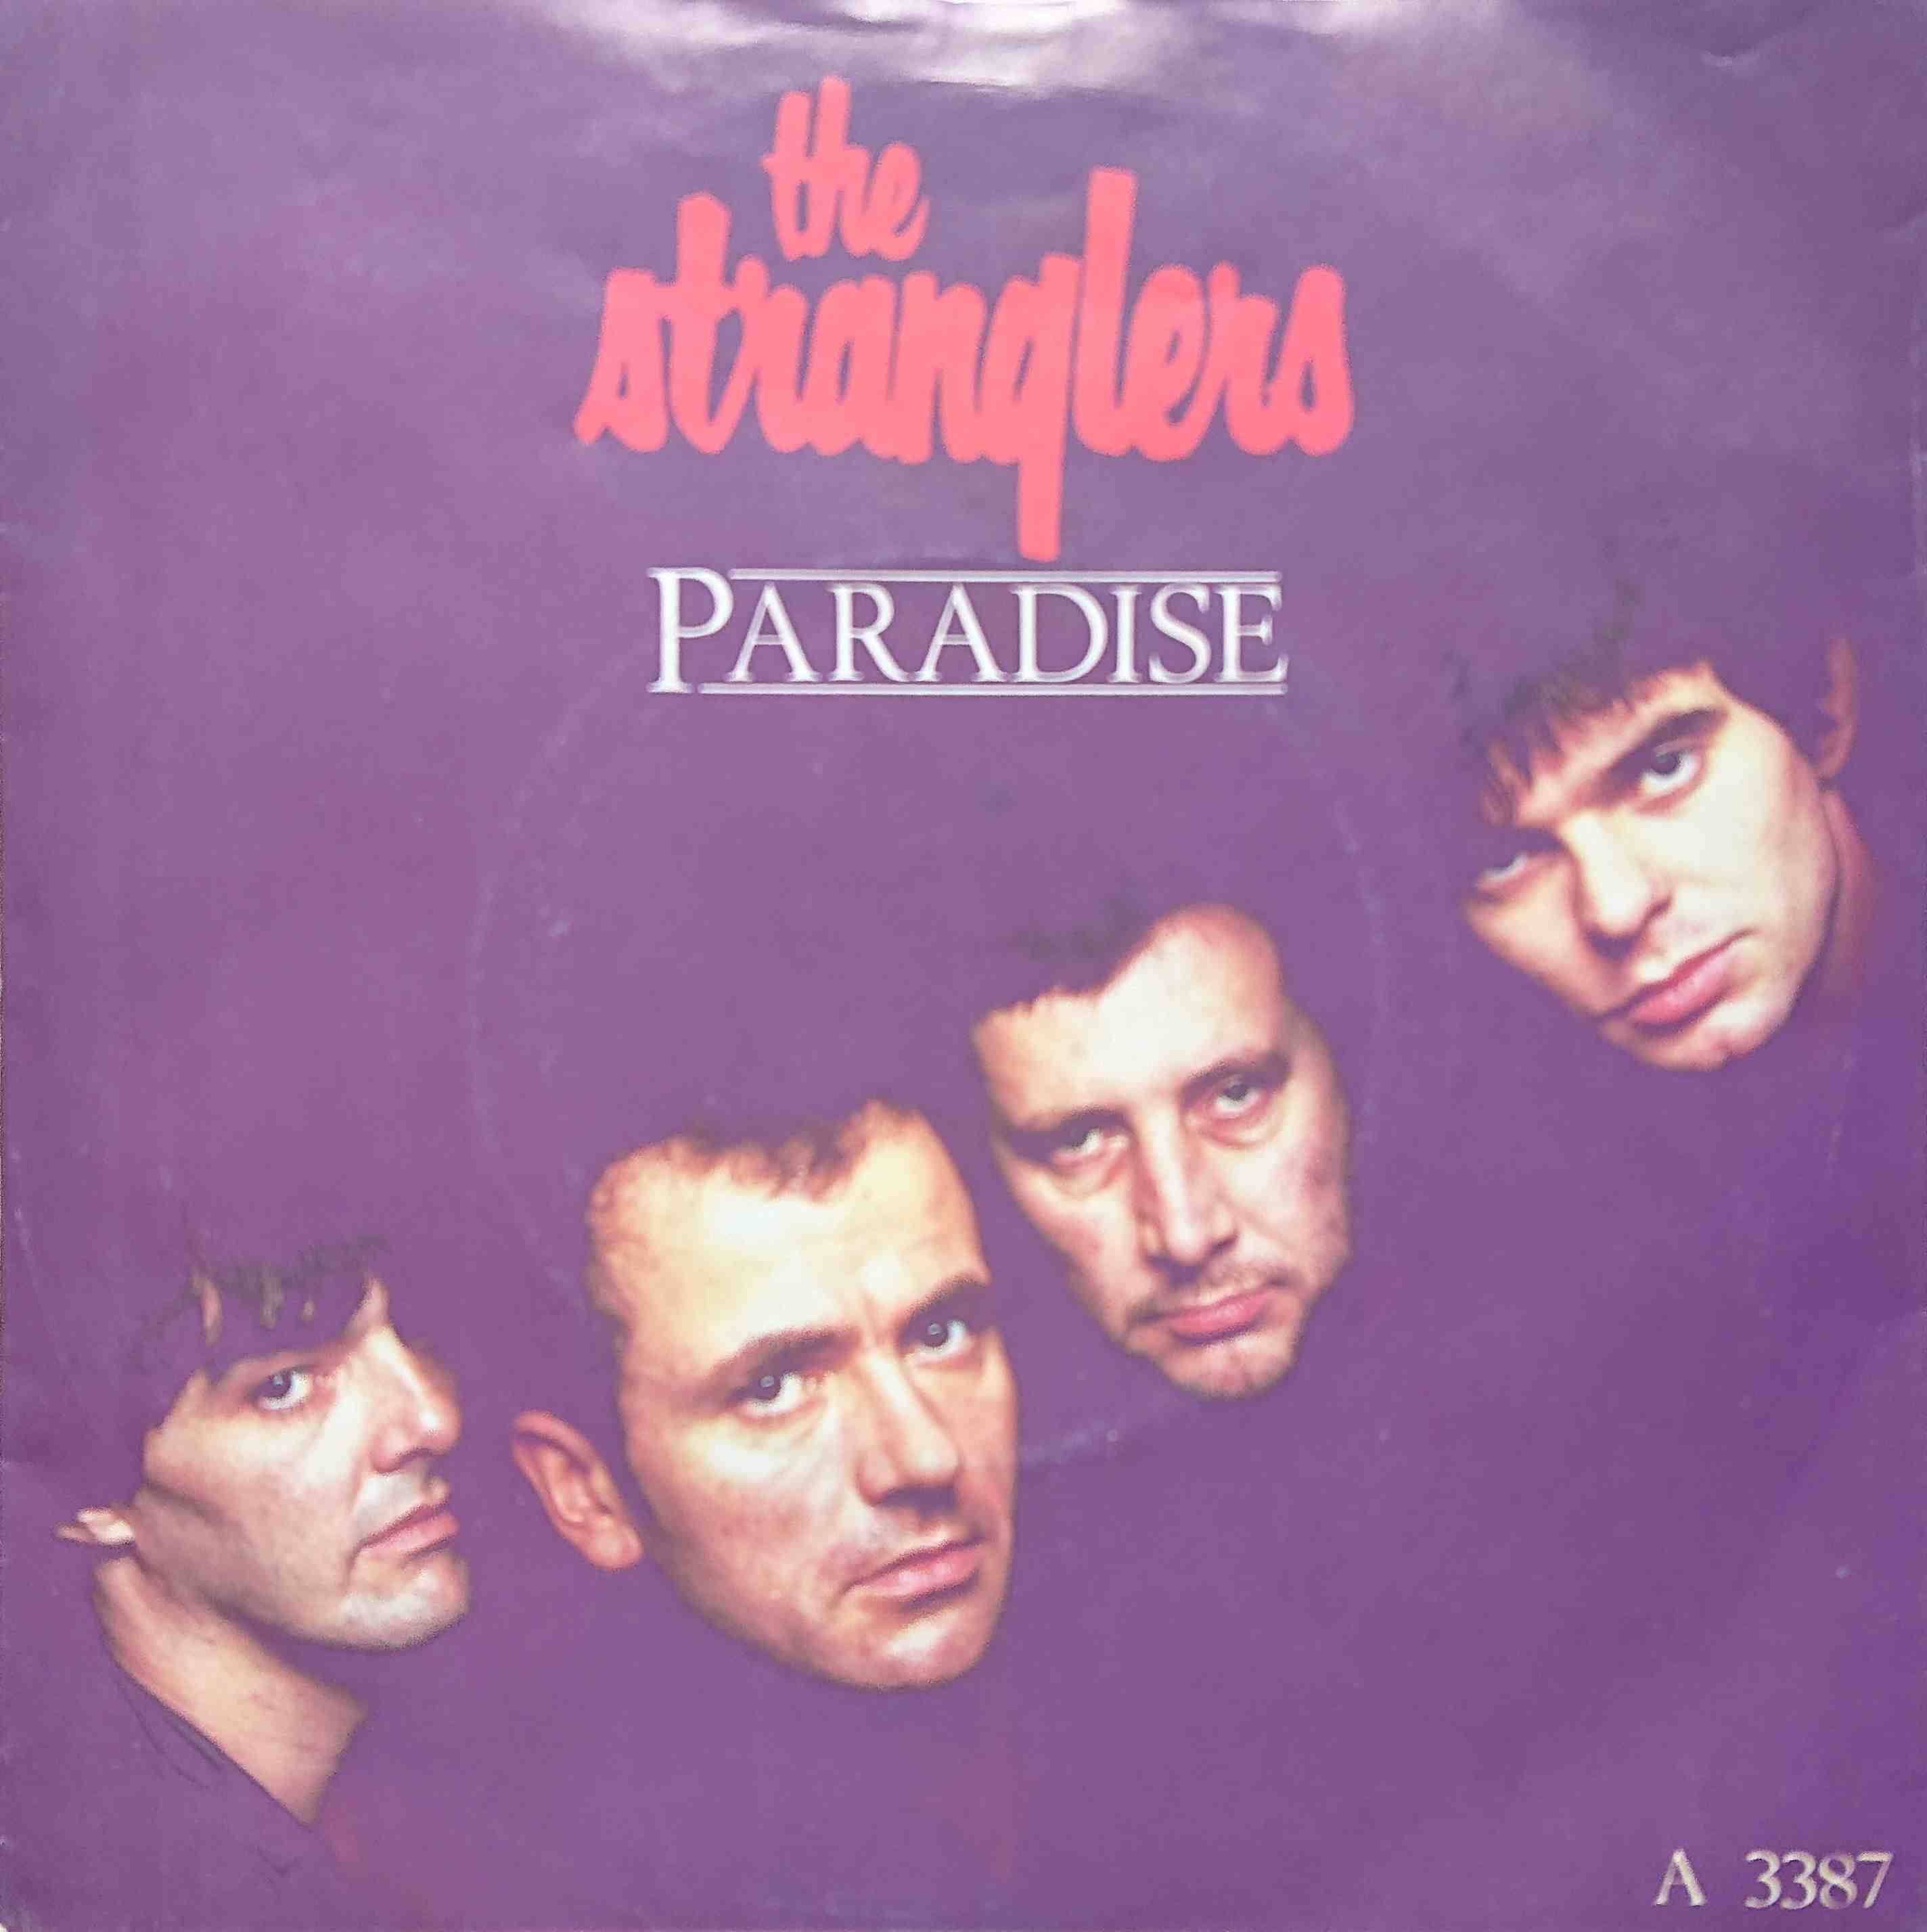 Picture of Paradise by artist The Stranglers from The Stranglers singles